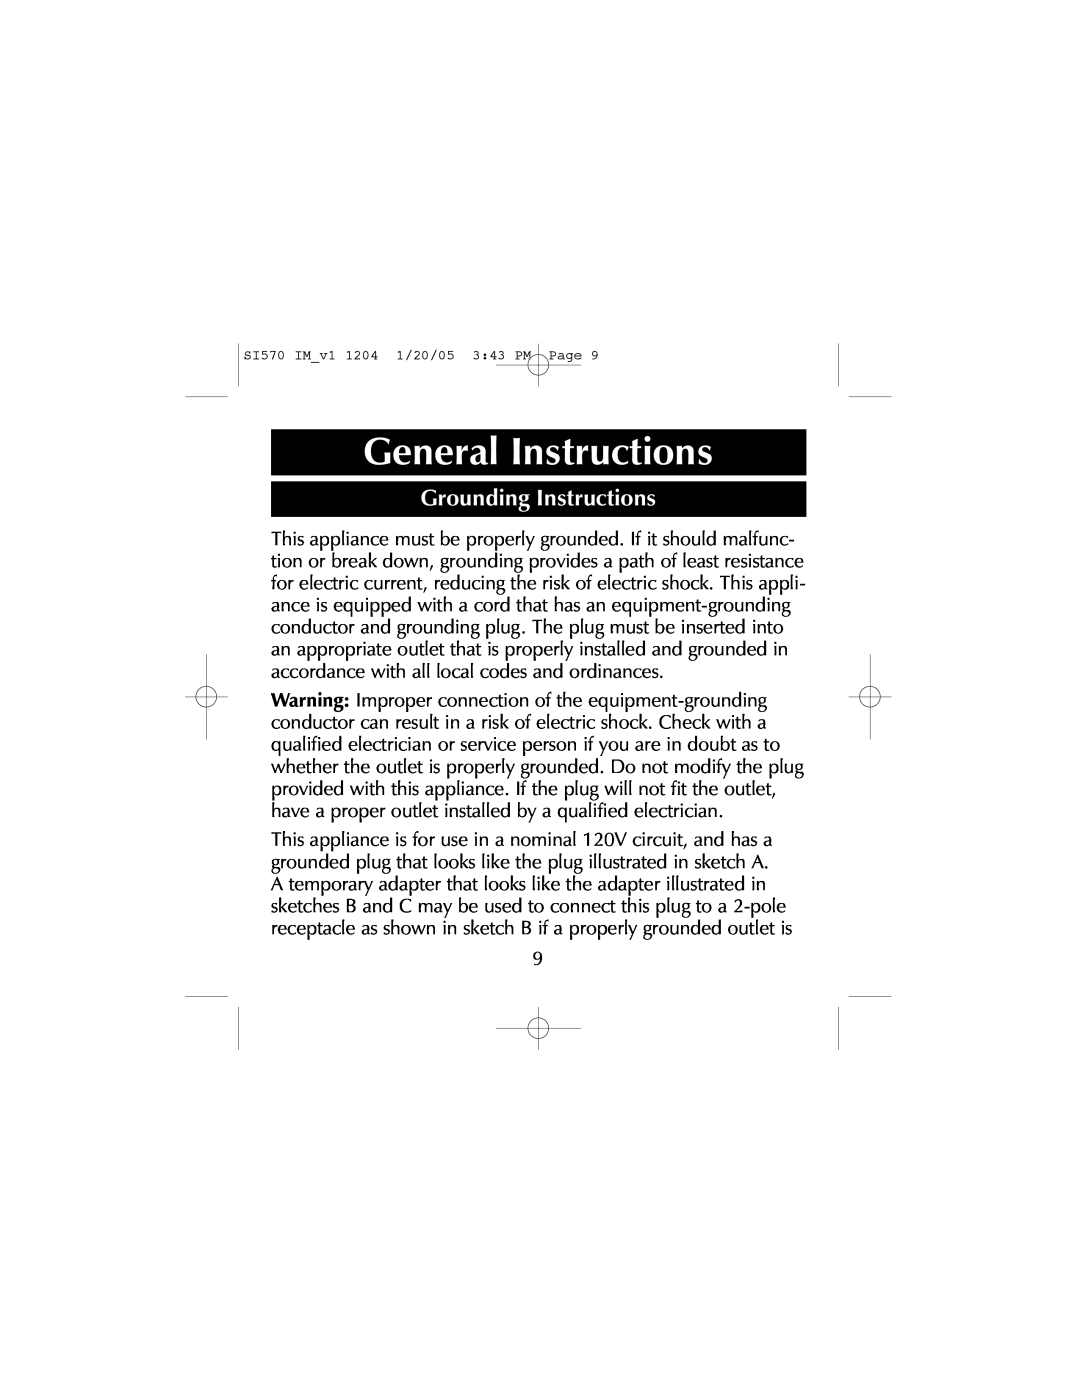 Sharper Image S1570 manual General Instructions, Grounding Instructions 